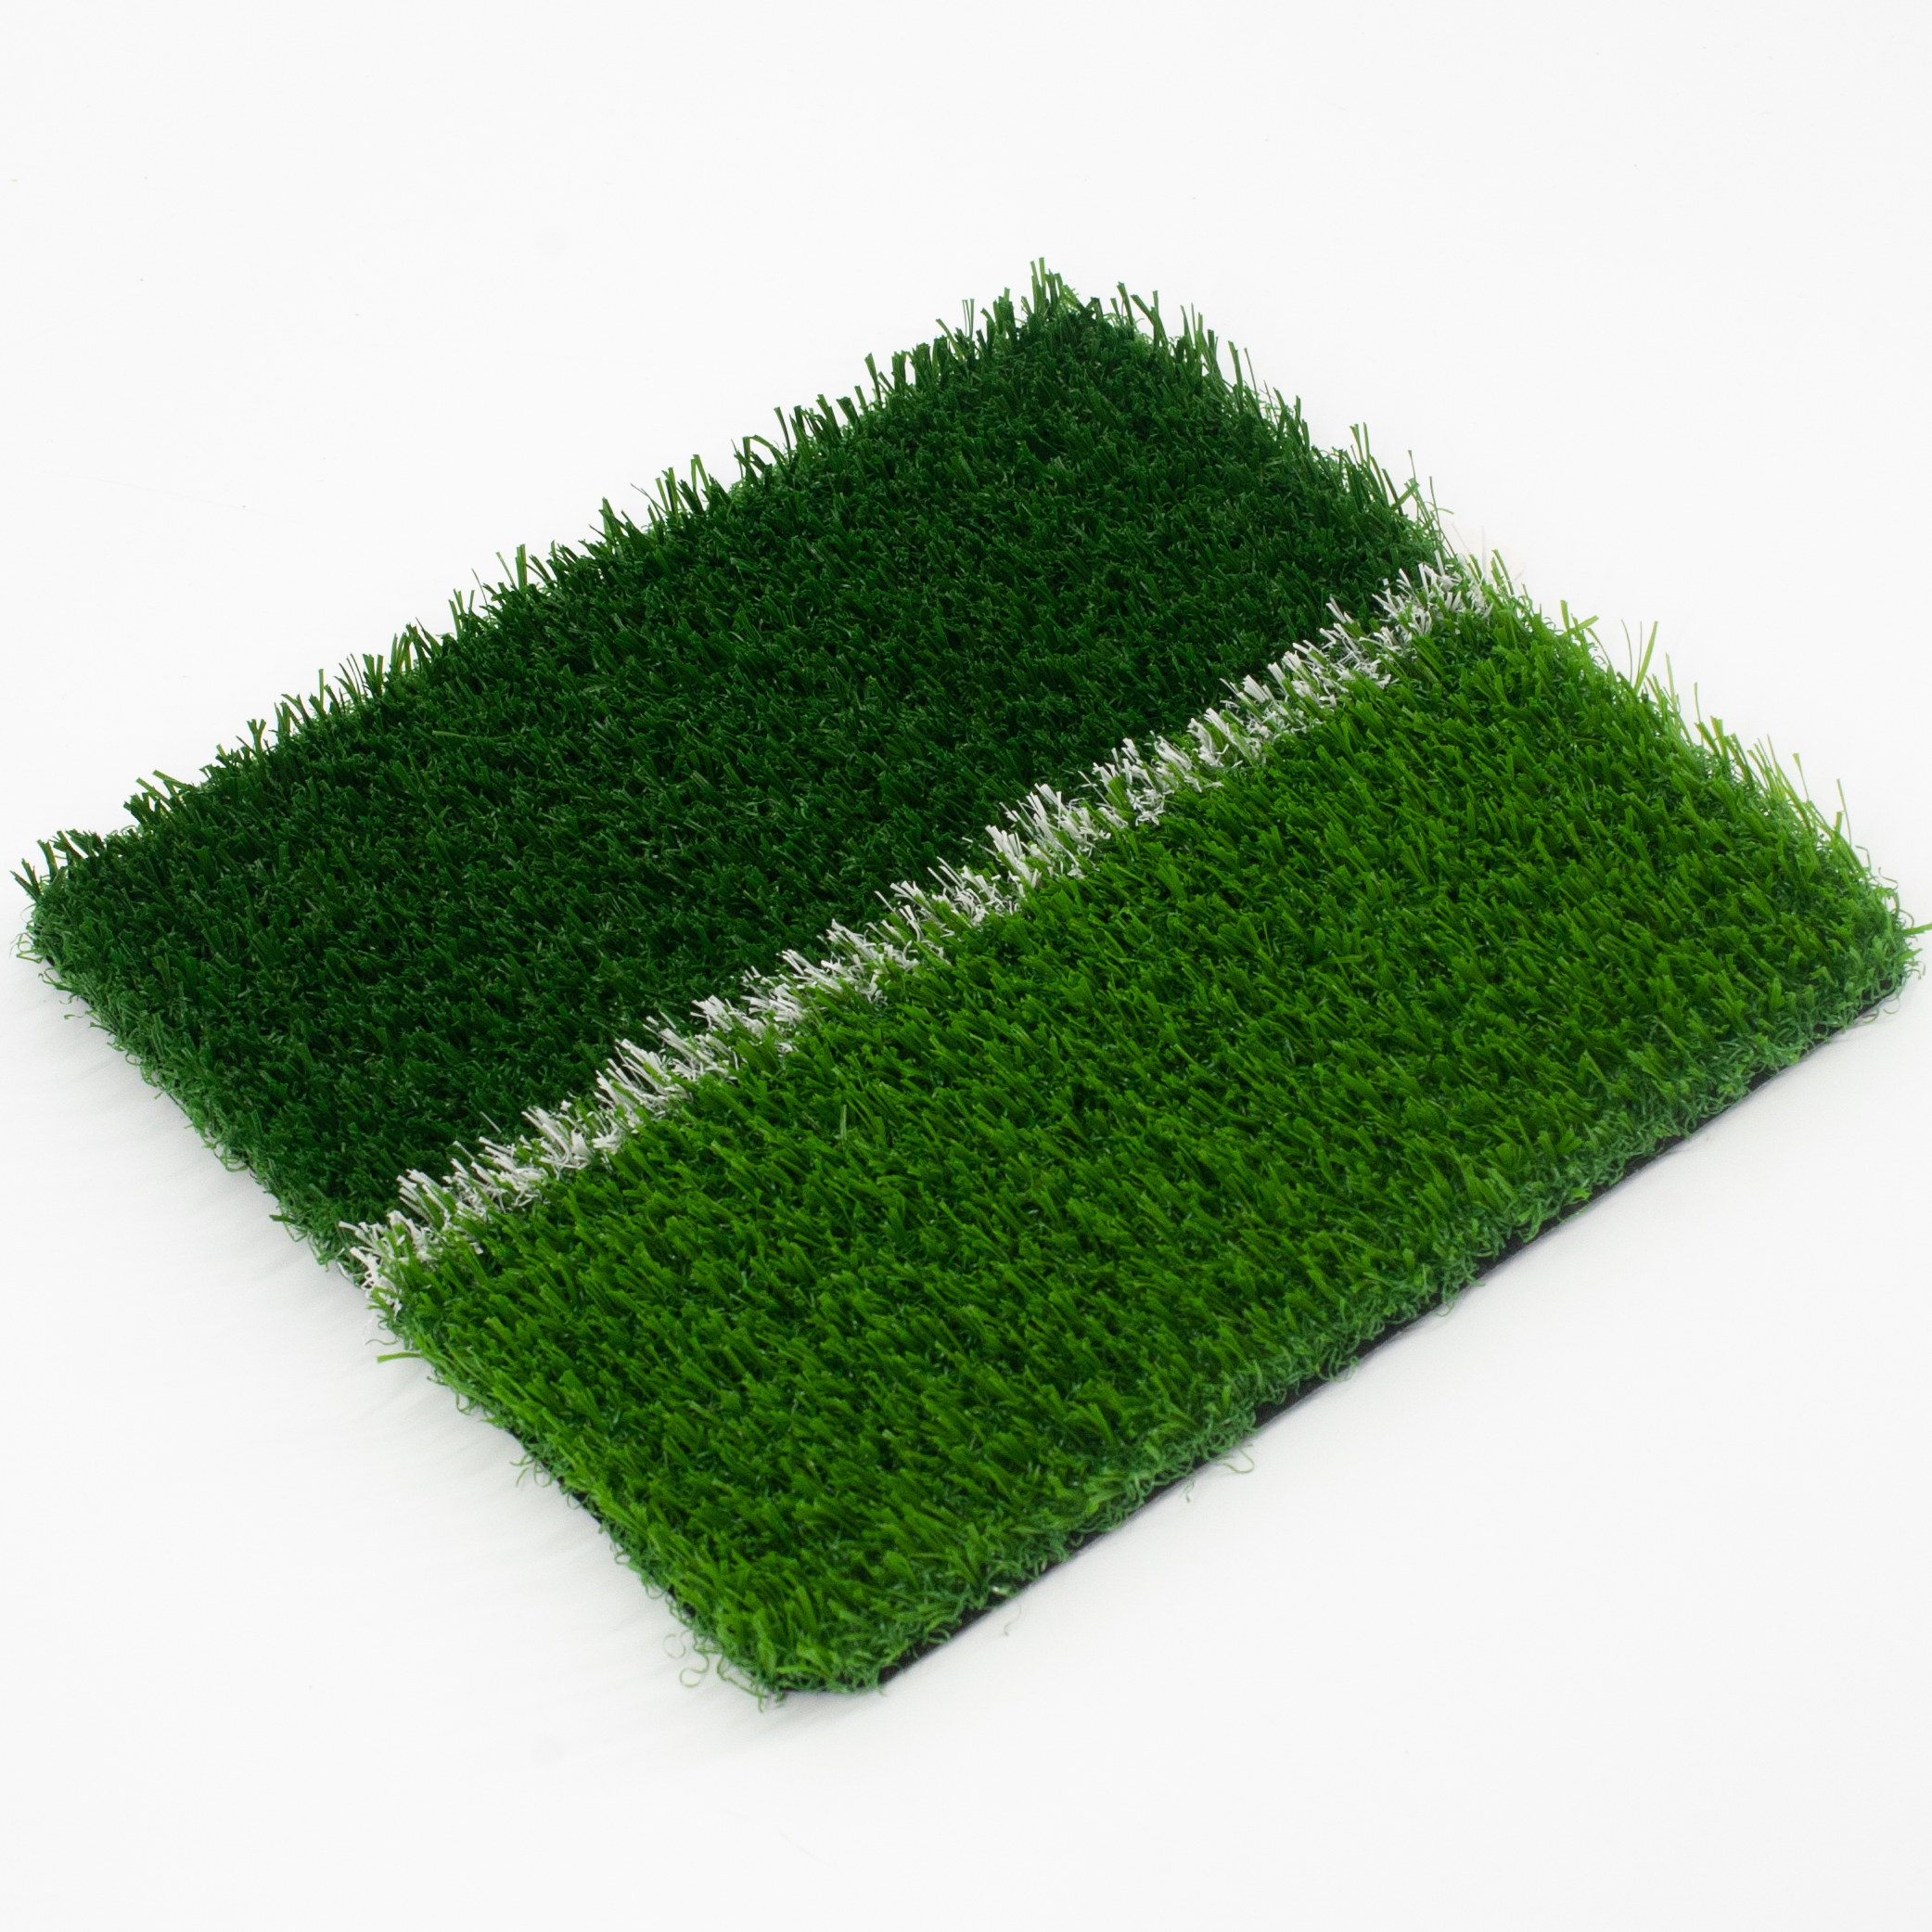 Football Synthetic Turf, Soccer Artificial Grass, Football Grass, Soccer Turf, Synthetic Turf, Lawn, Artificial Grass